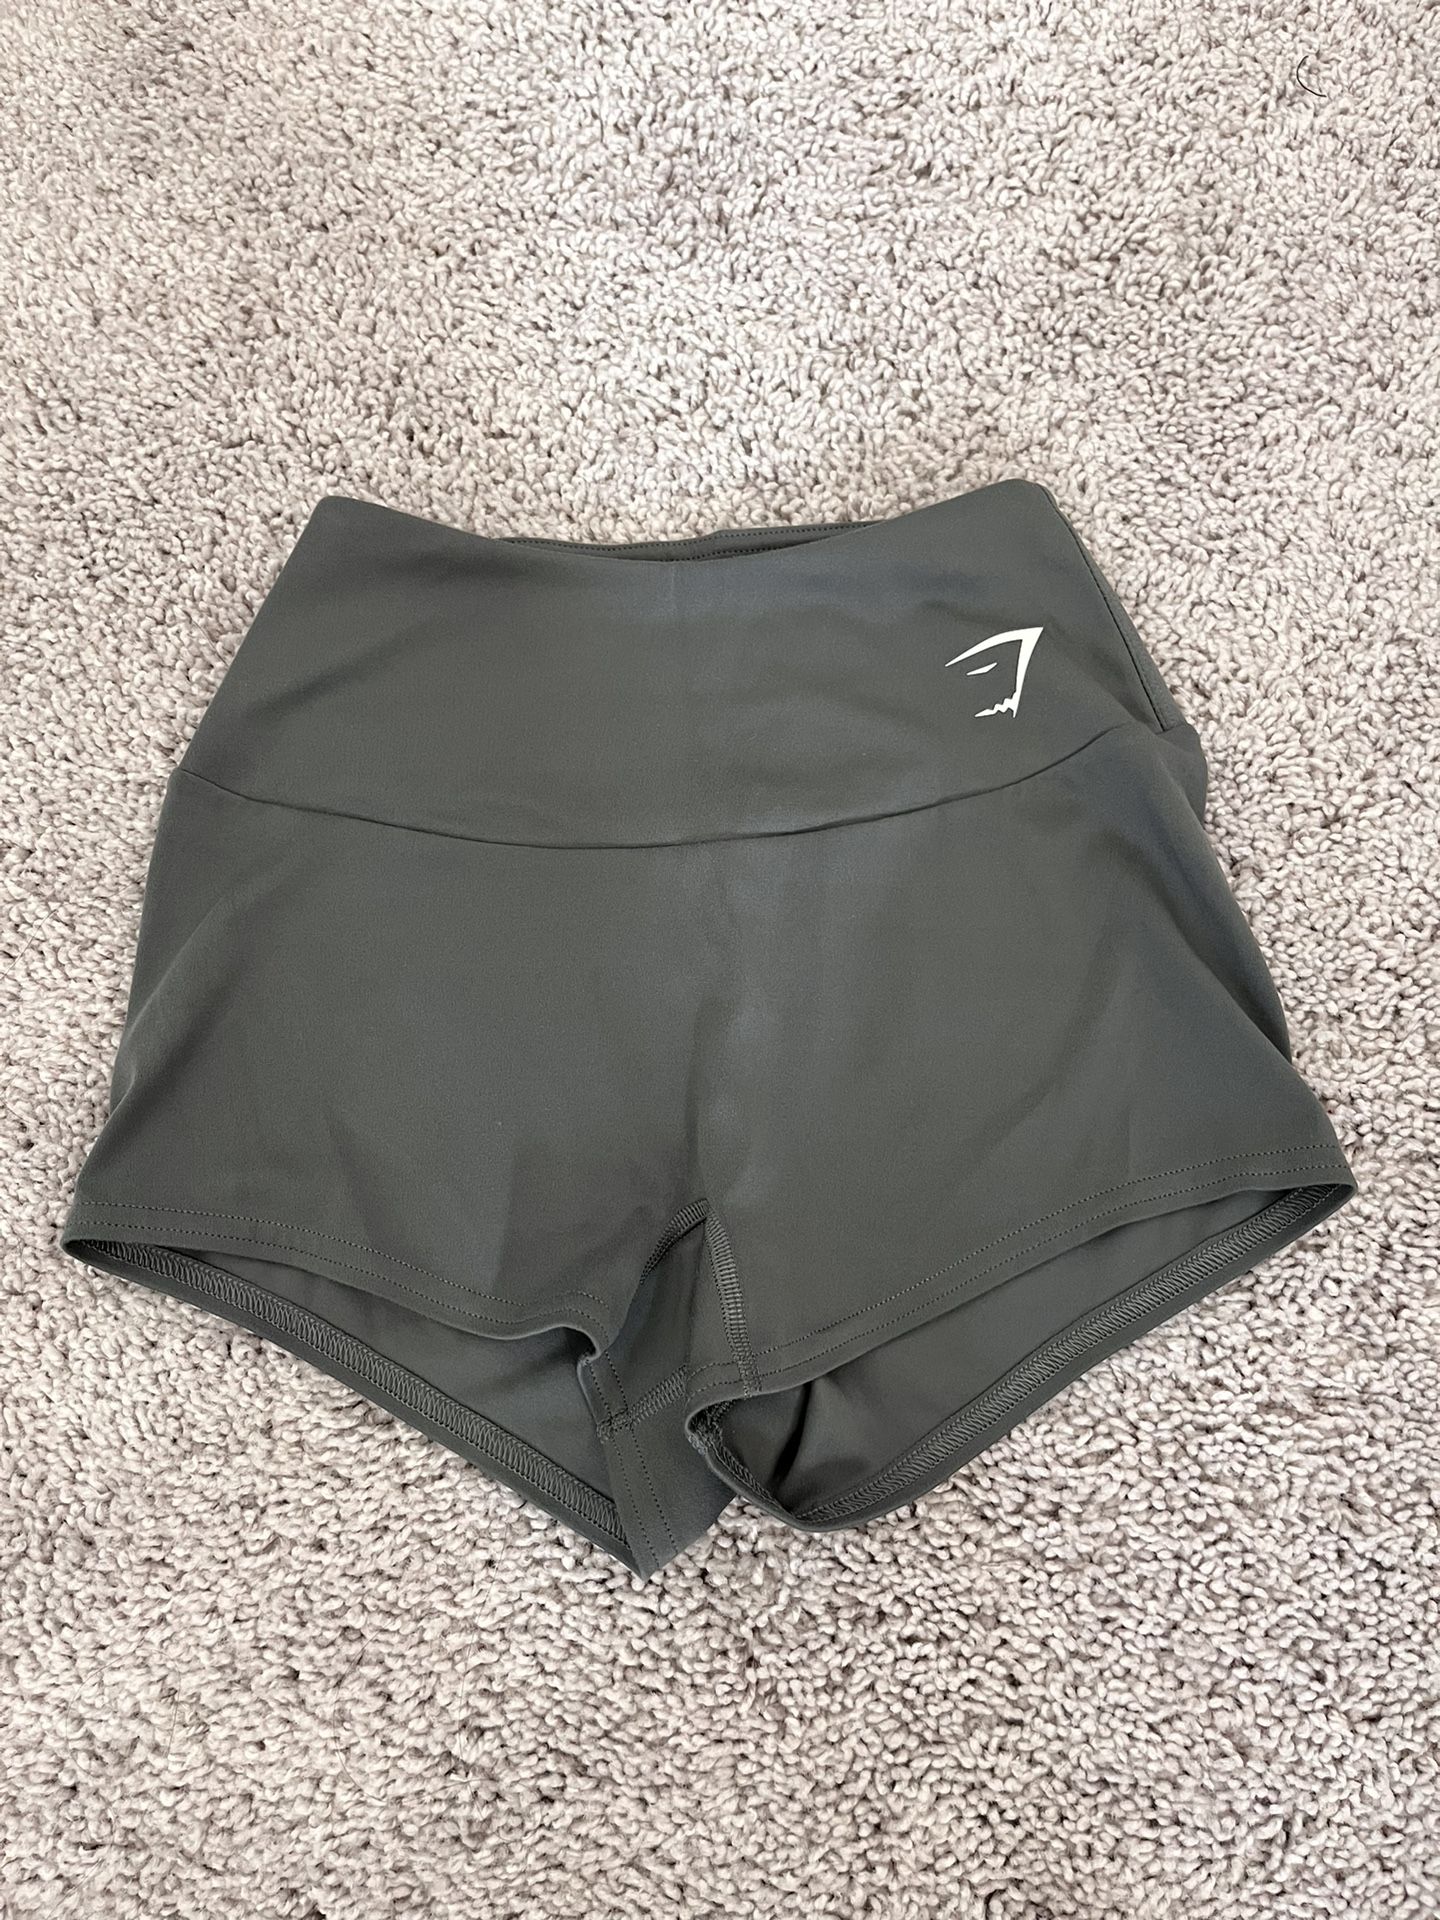 Gymshark Training Short Length Shorts for Sale in Fort Worth, TX - OfferUp